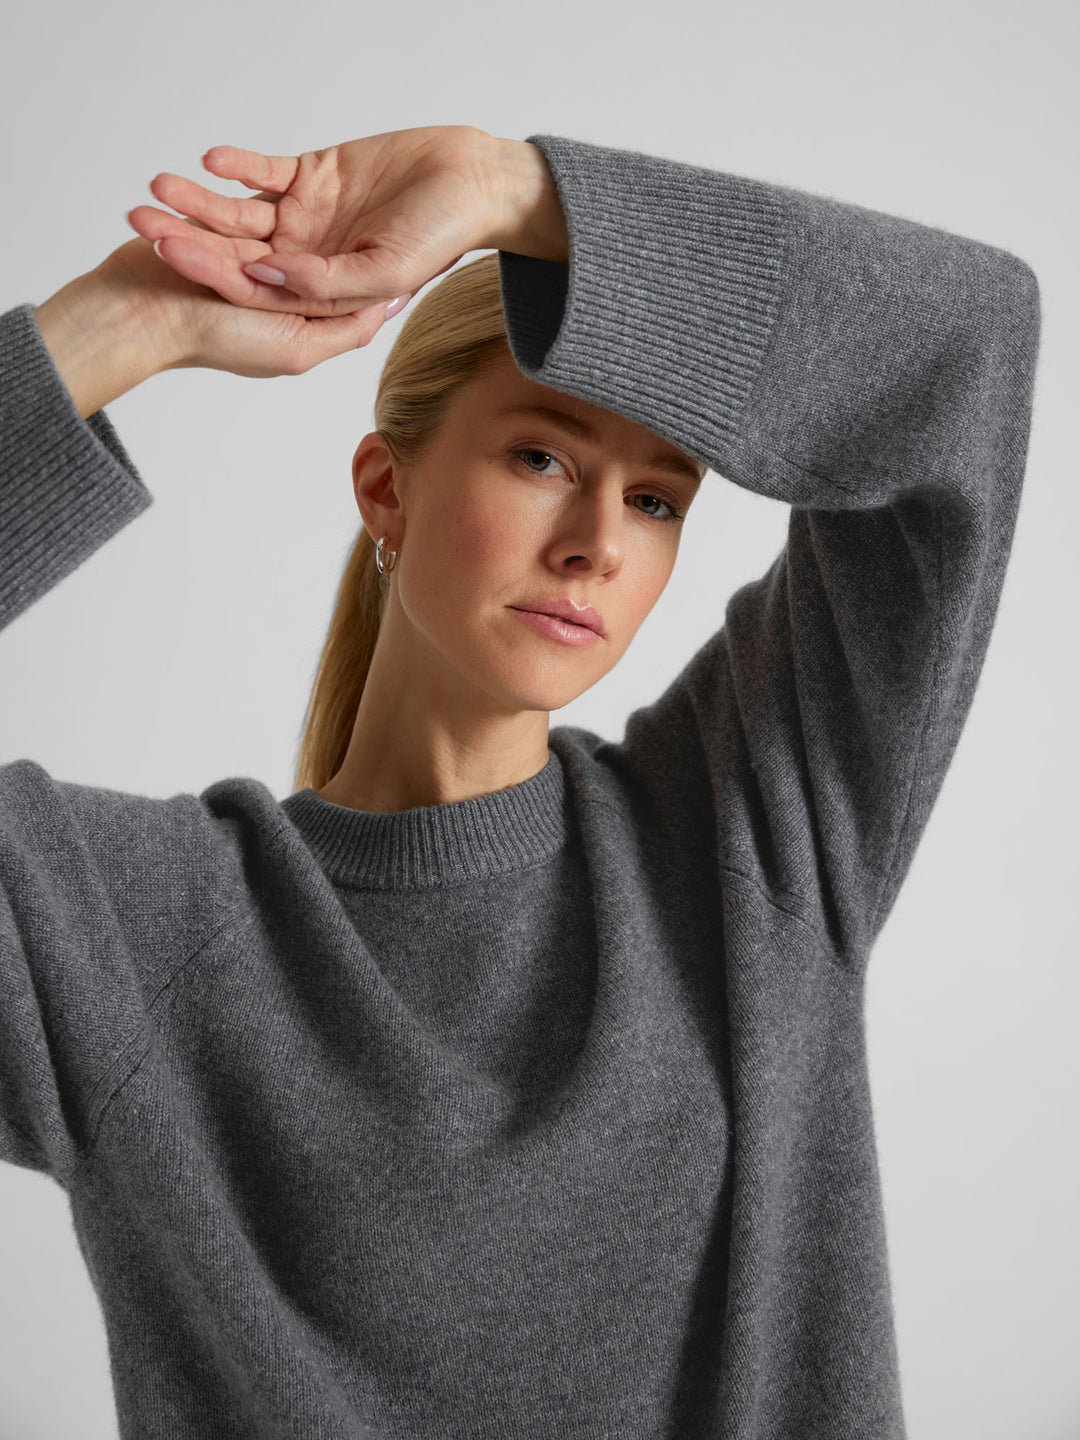 Thick cashmere sweater "Signy" in 100% pure cashmere. Scandinavian design by Kashmina. Color: Dark grey.Chunky cashmere sweater "Signy" in 100% pure cashmere. Scandinavian design by Kashmina. Color: Dark grey.